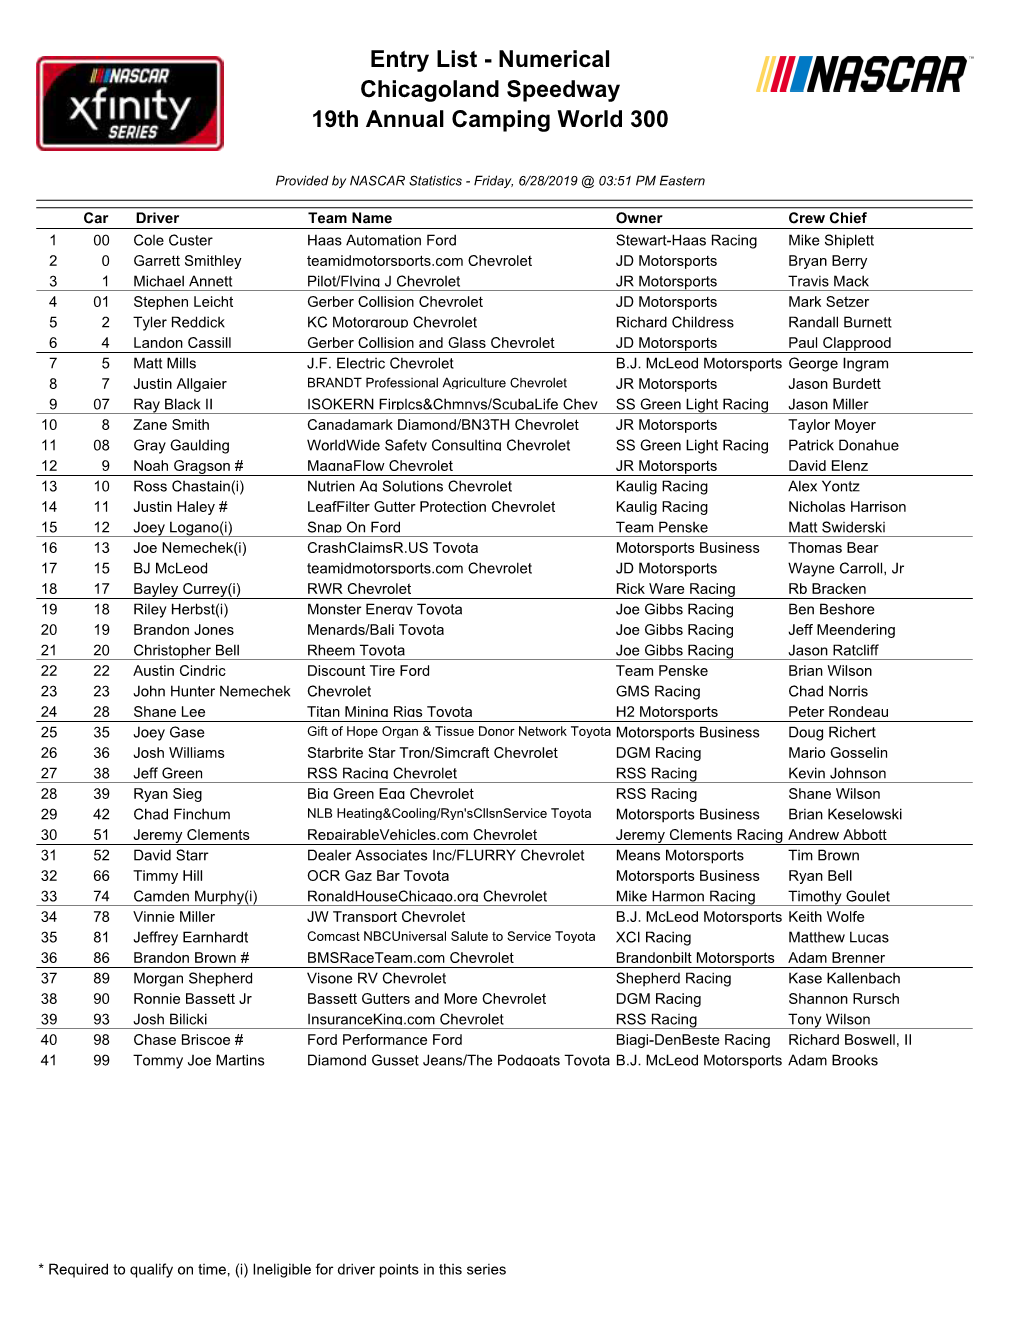 Entry List - Numerical Chicagoland Speedway 19Th Annual Camping World 300